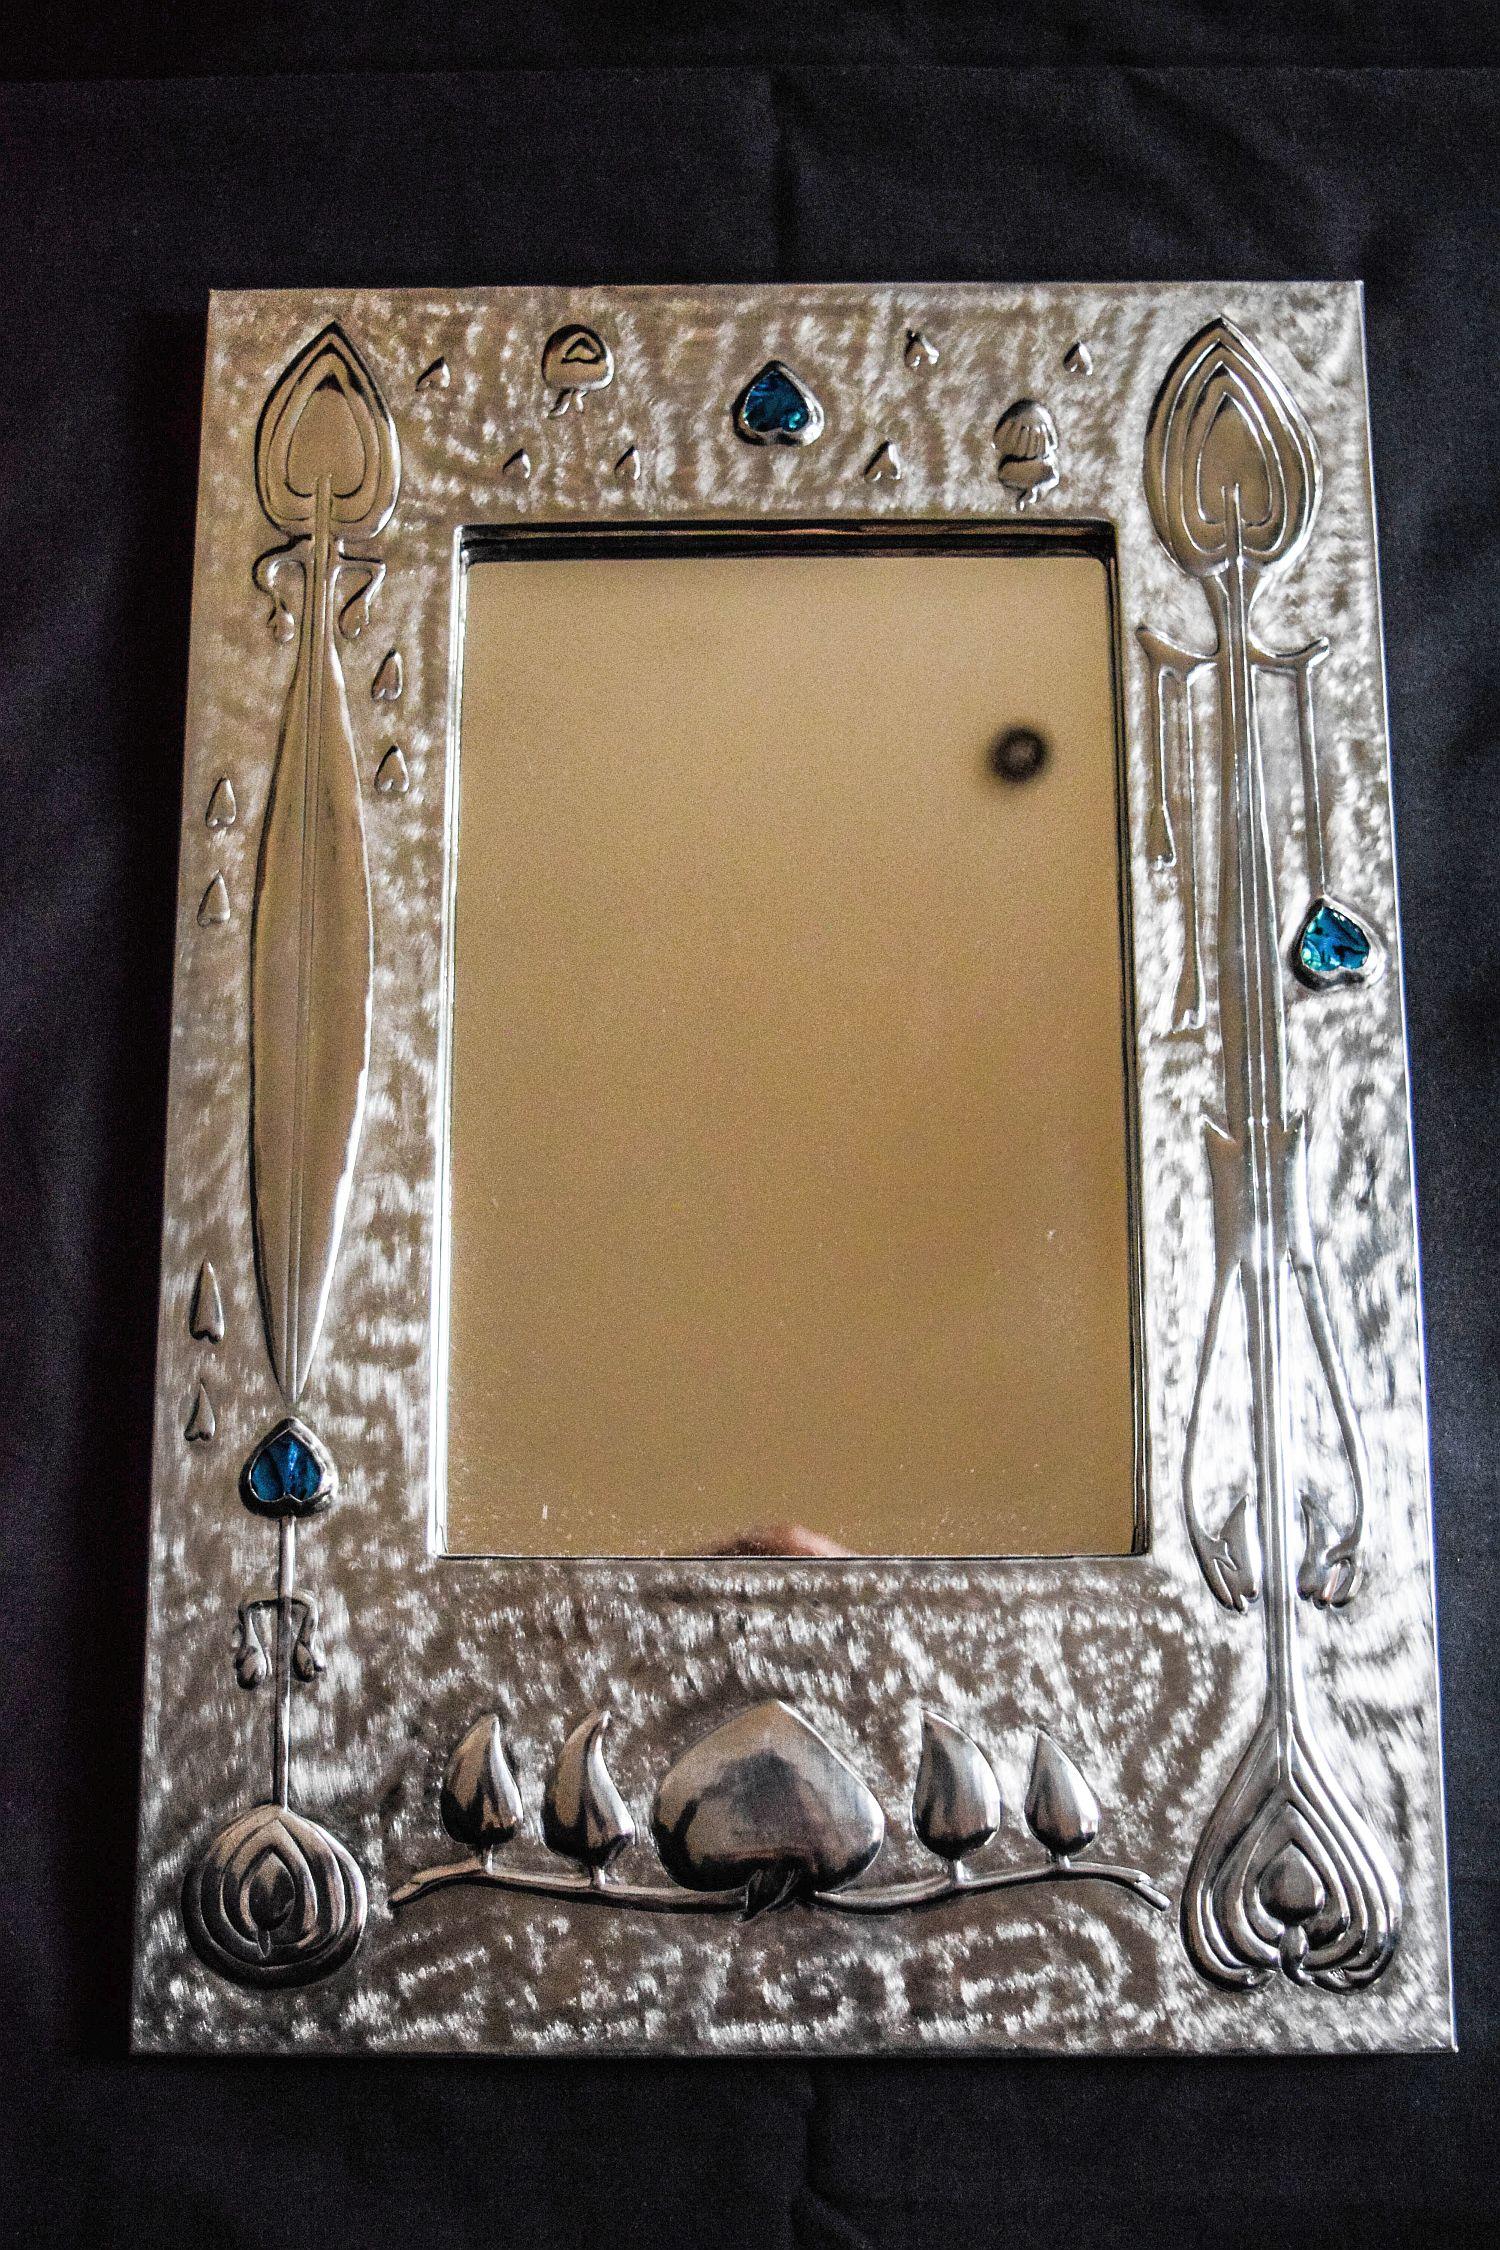 Contemporary Arts and Crafts Pewter Mirror with blue Cabuchons
A contemporary Arts and Crafts ornate pewter mirror with blue enamel cabuchons made by
M.Santos.Marked M.Santos on the edge and signed on the back.Also marked “HEART and 
Spoons.Abalone